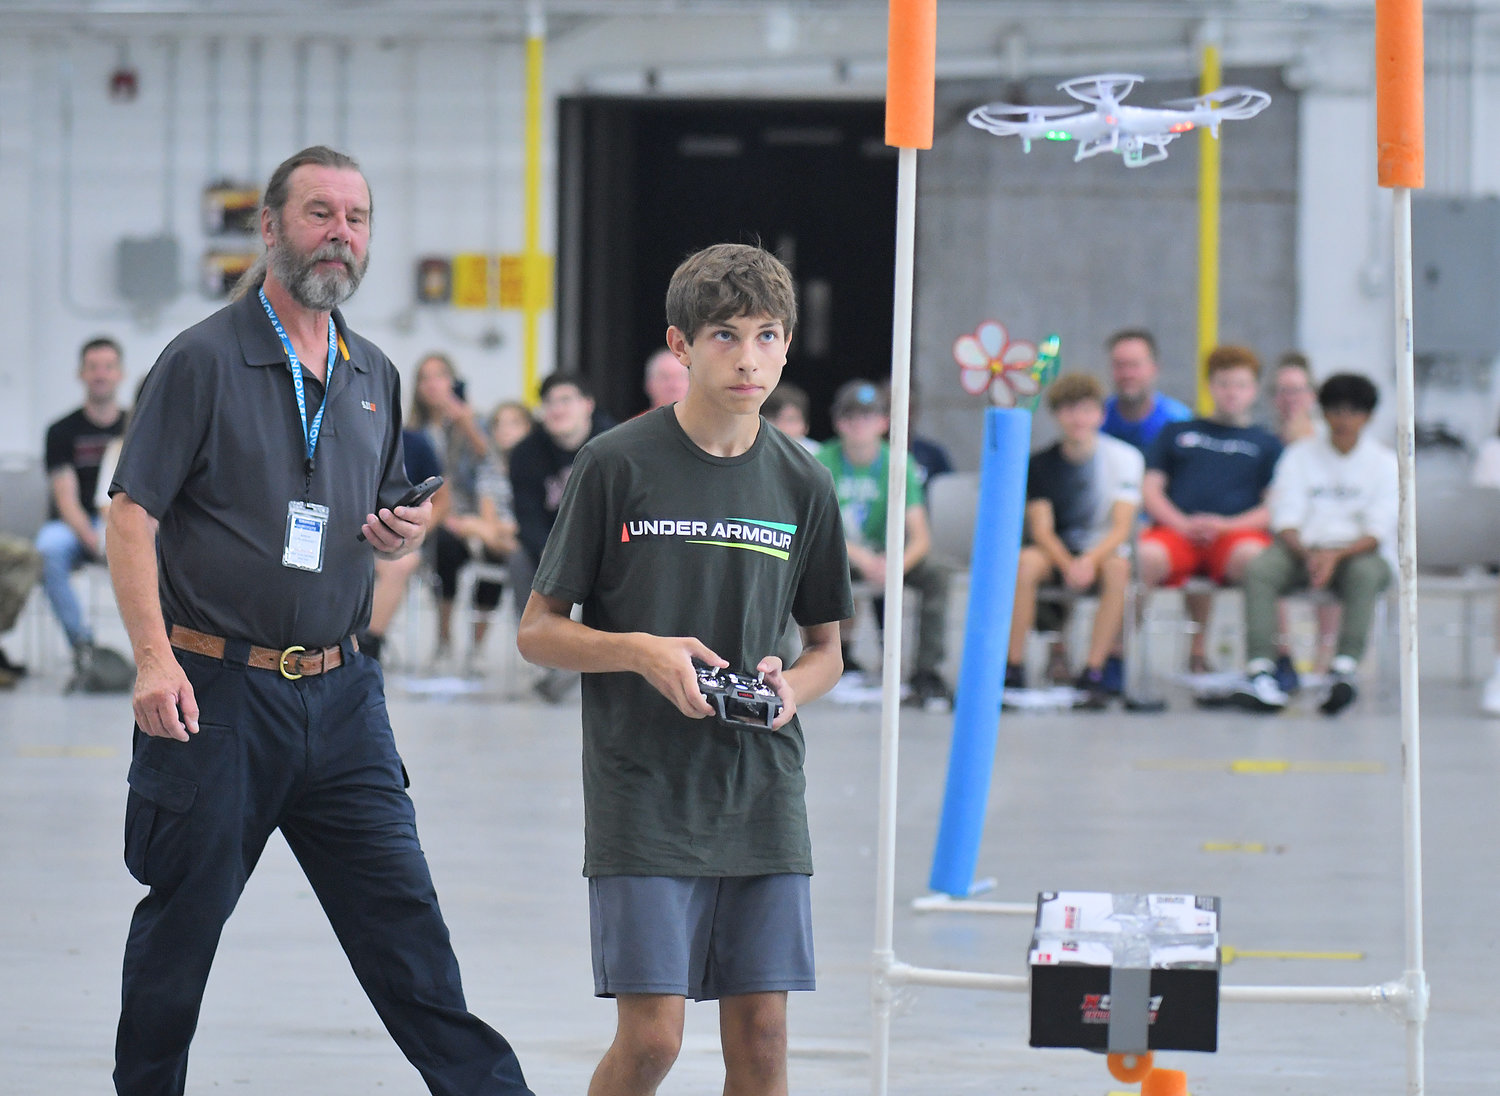 STEELY CONCENTRATION — Oriskany High School student Jack Tagliaferri navigates his drone toward one of the obstacles during the Directorate STEM Outreach Program’s Drone Camp in the hangar at Innovare Advancement Center. Campers competed against each other on the final morning of the camp to see who could navigate the course the quickest and most accurately.